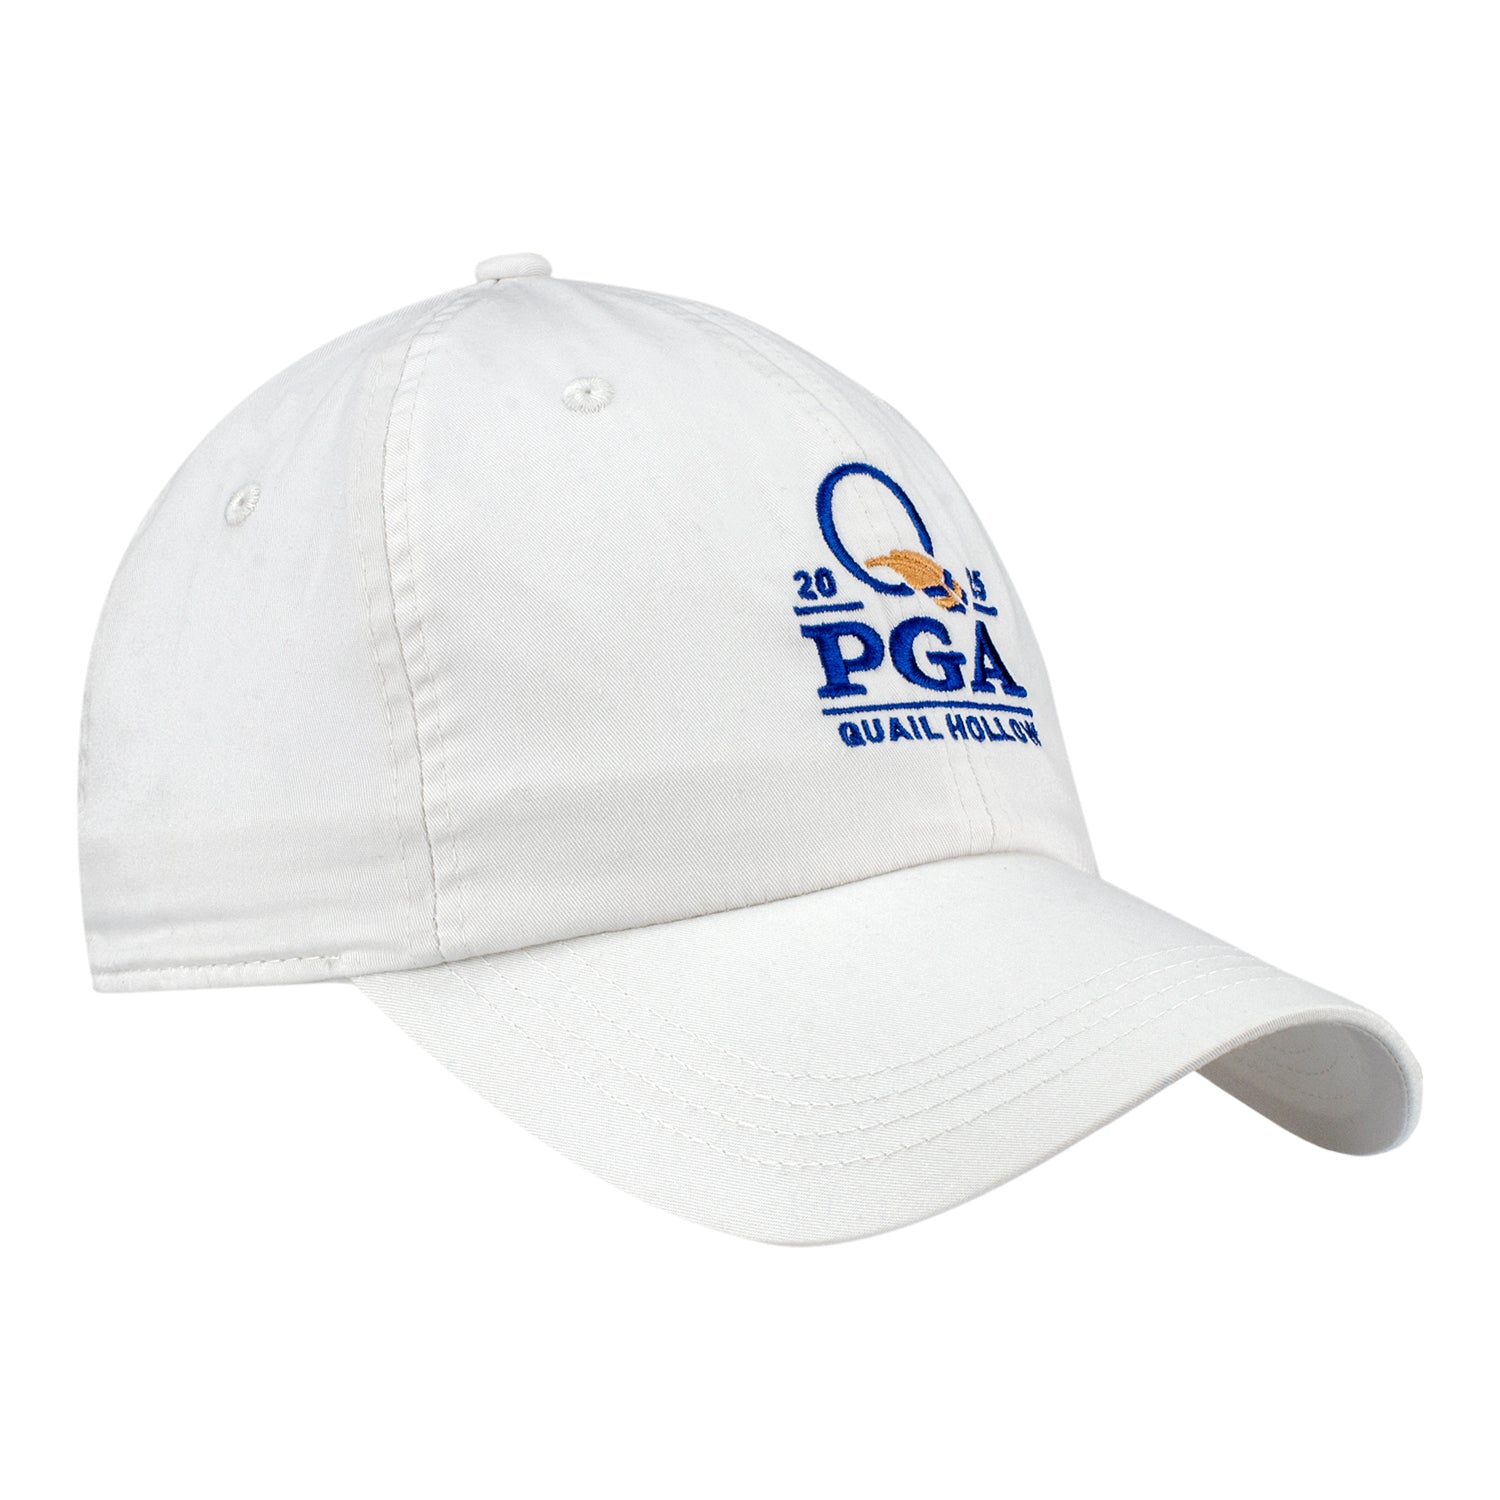 Ahead 2025 PGA Championship Cotton Shawmut Hat in Oyster - Angled Front Left View